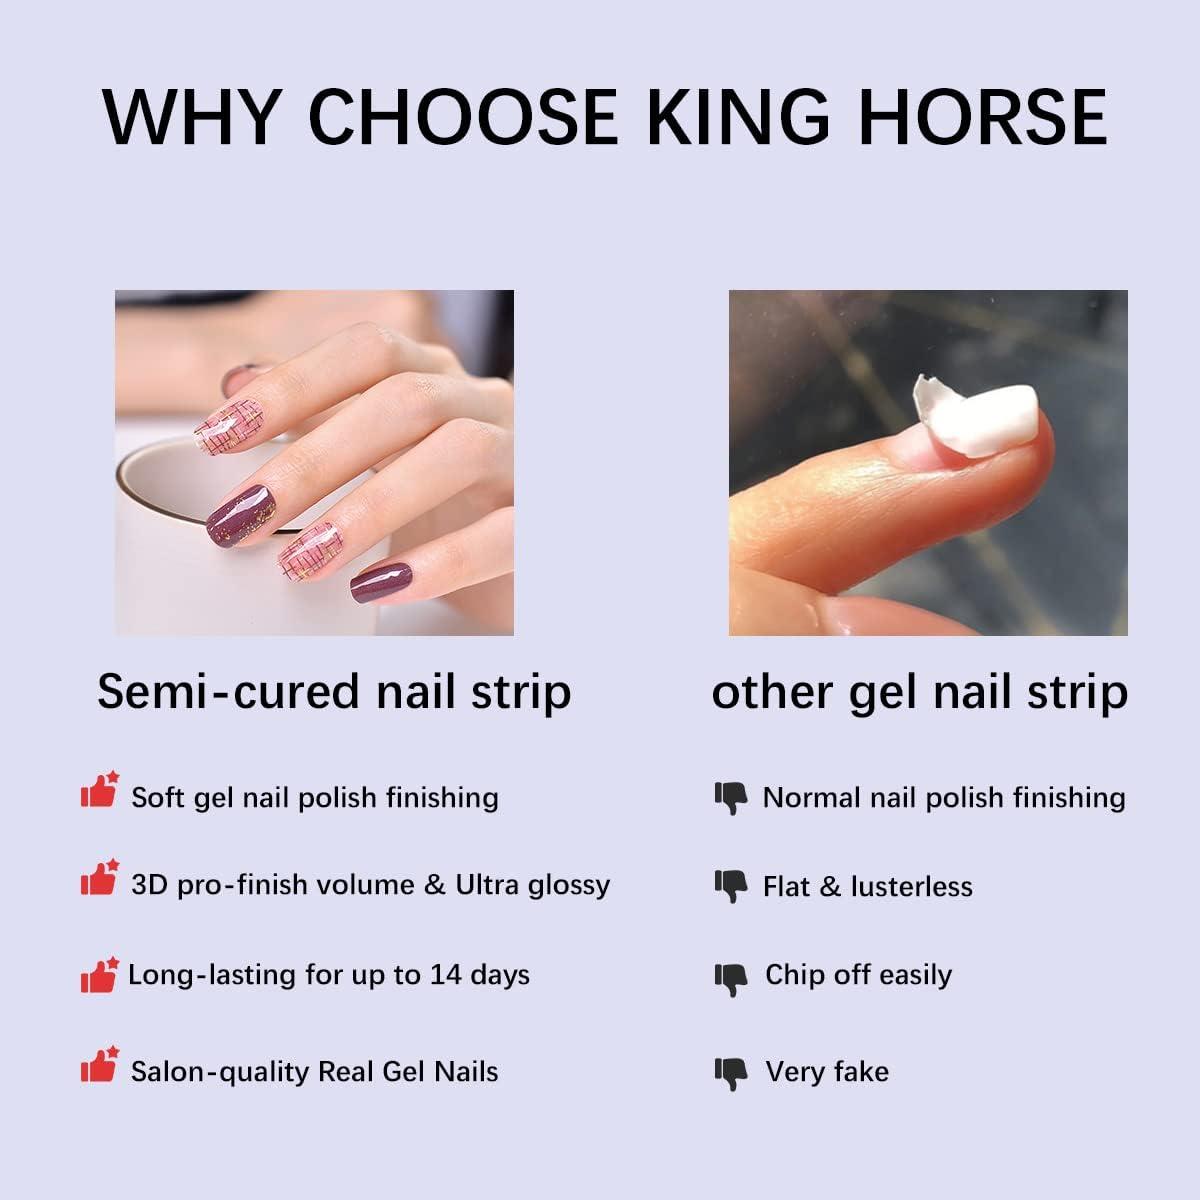 How To Apply Gel Nail Strips Like a Pro